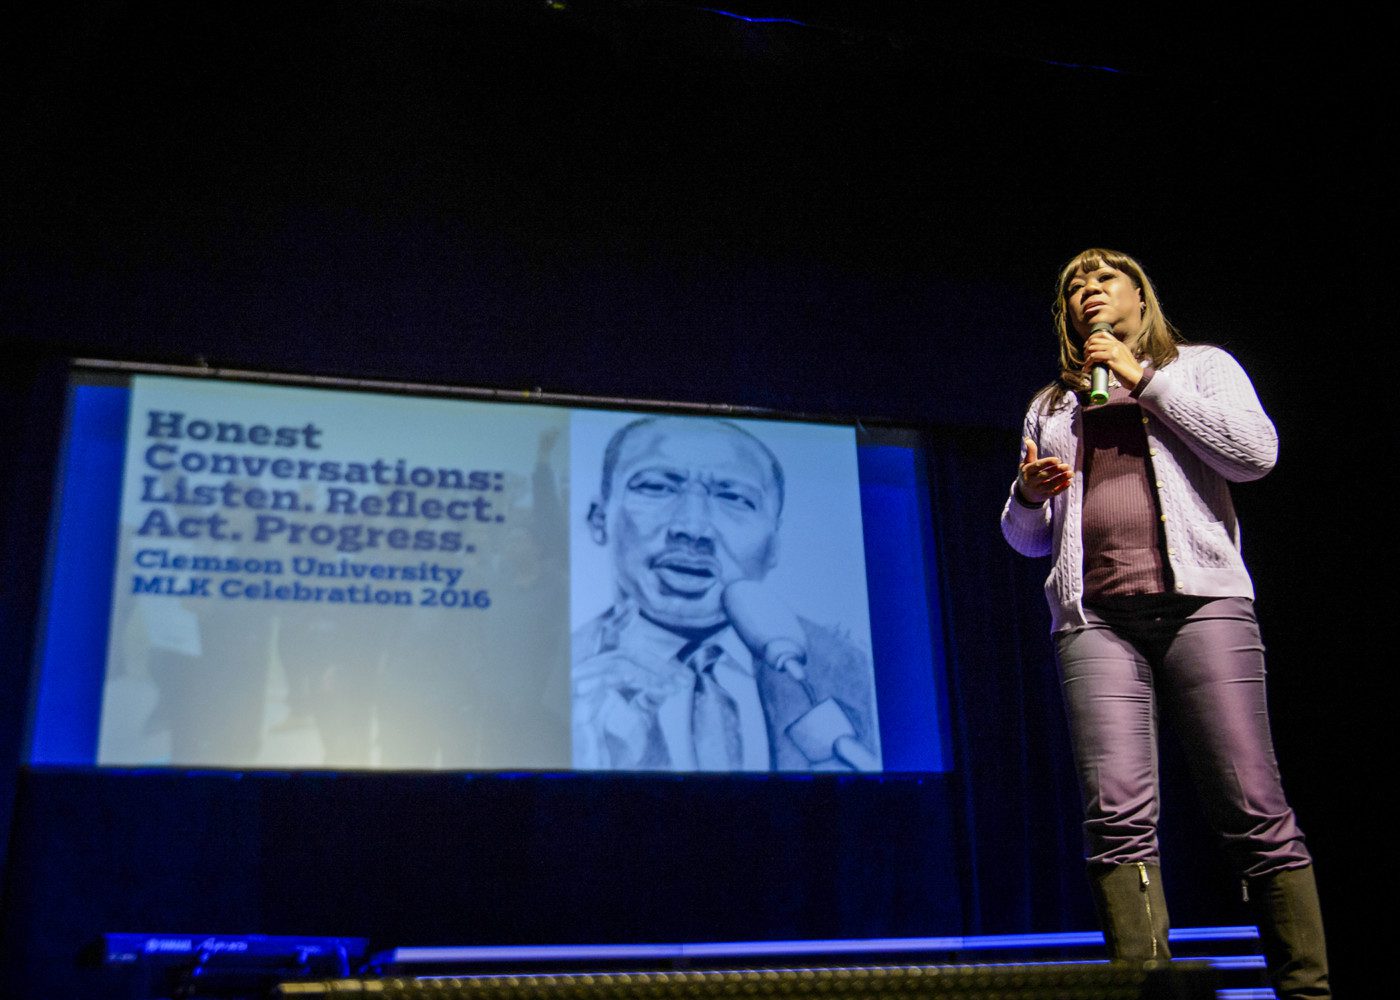 A woman stands on stage speaking into a microphone with a screen showing a graphic of the face of Dr. Martin Luther King Jr.